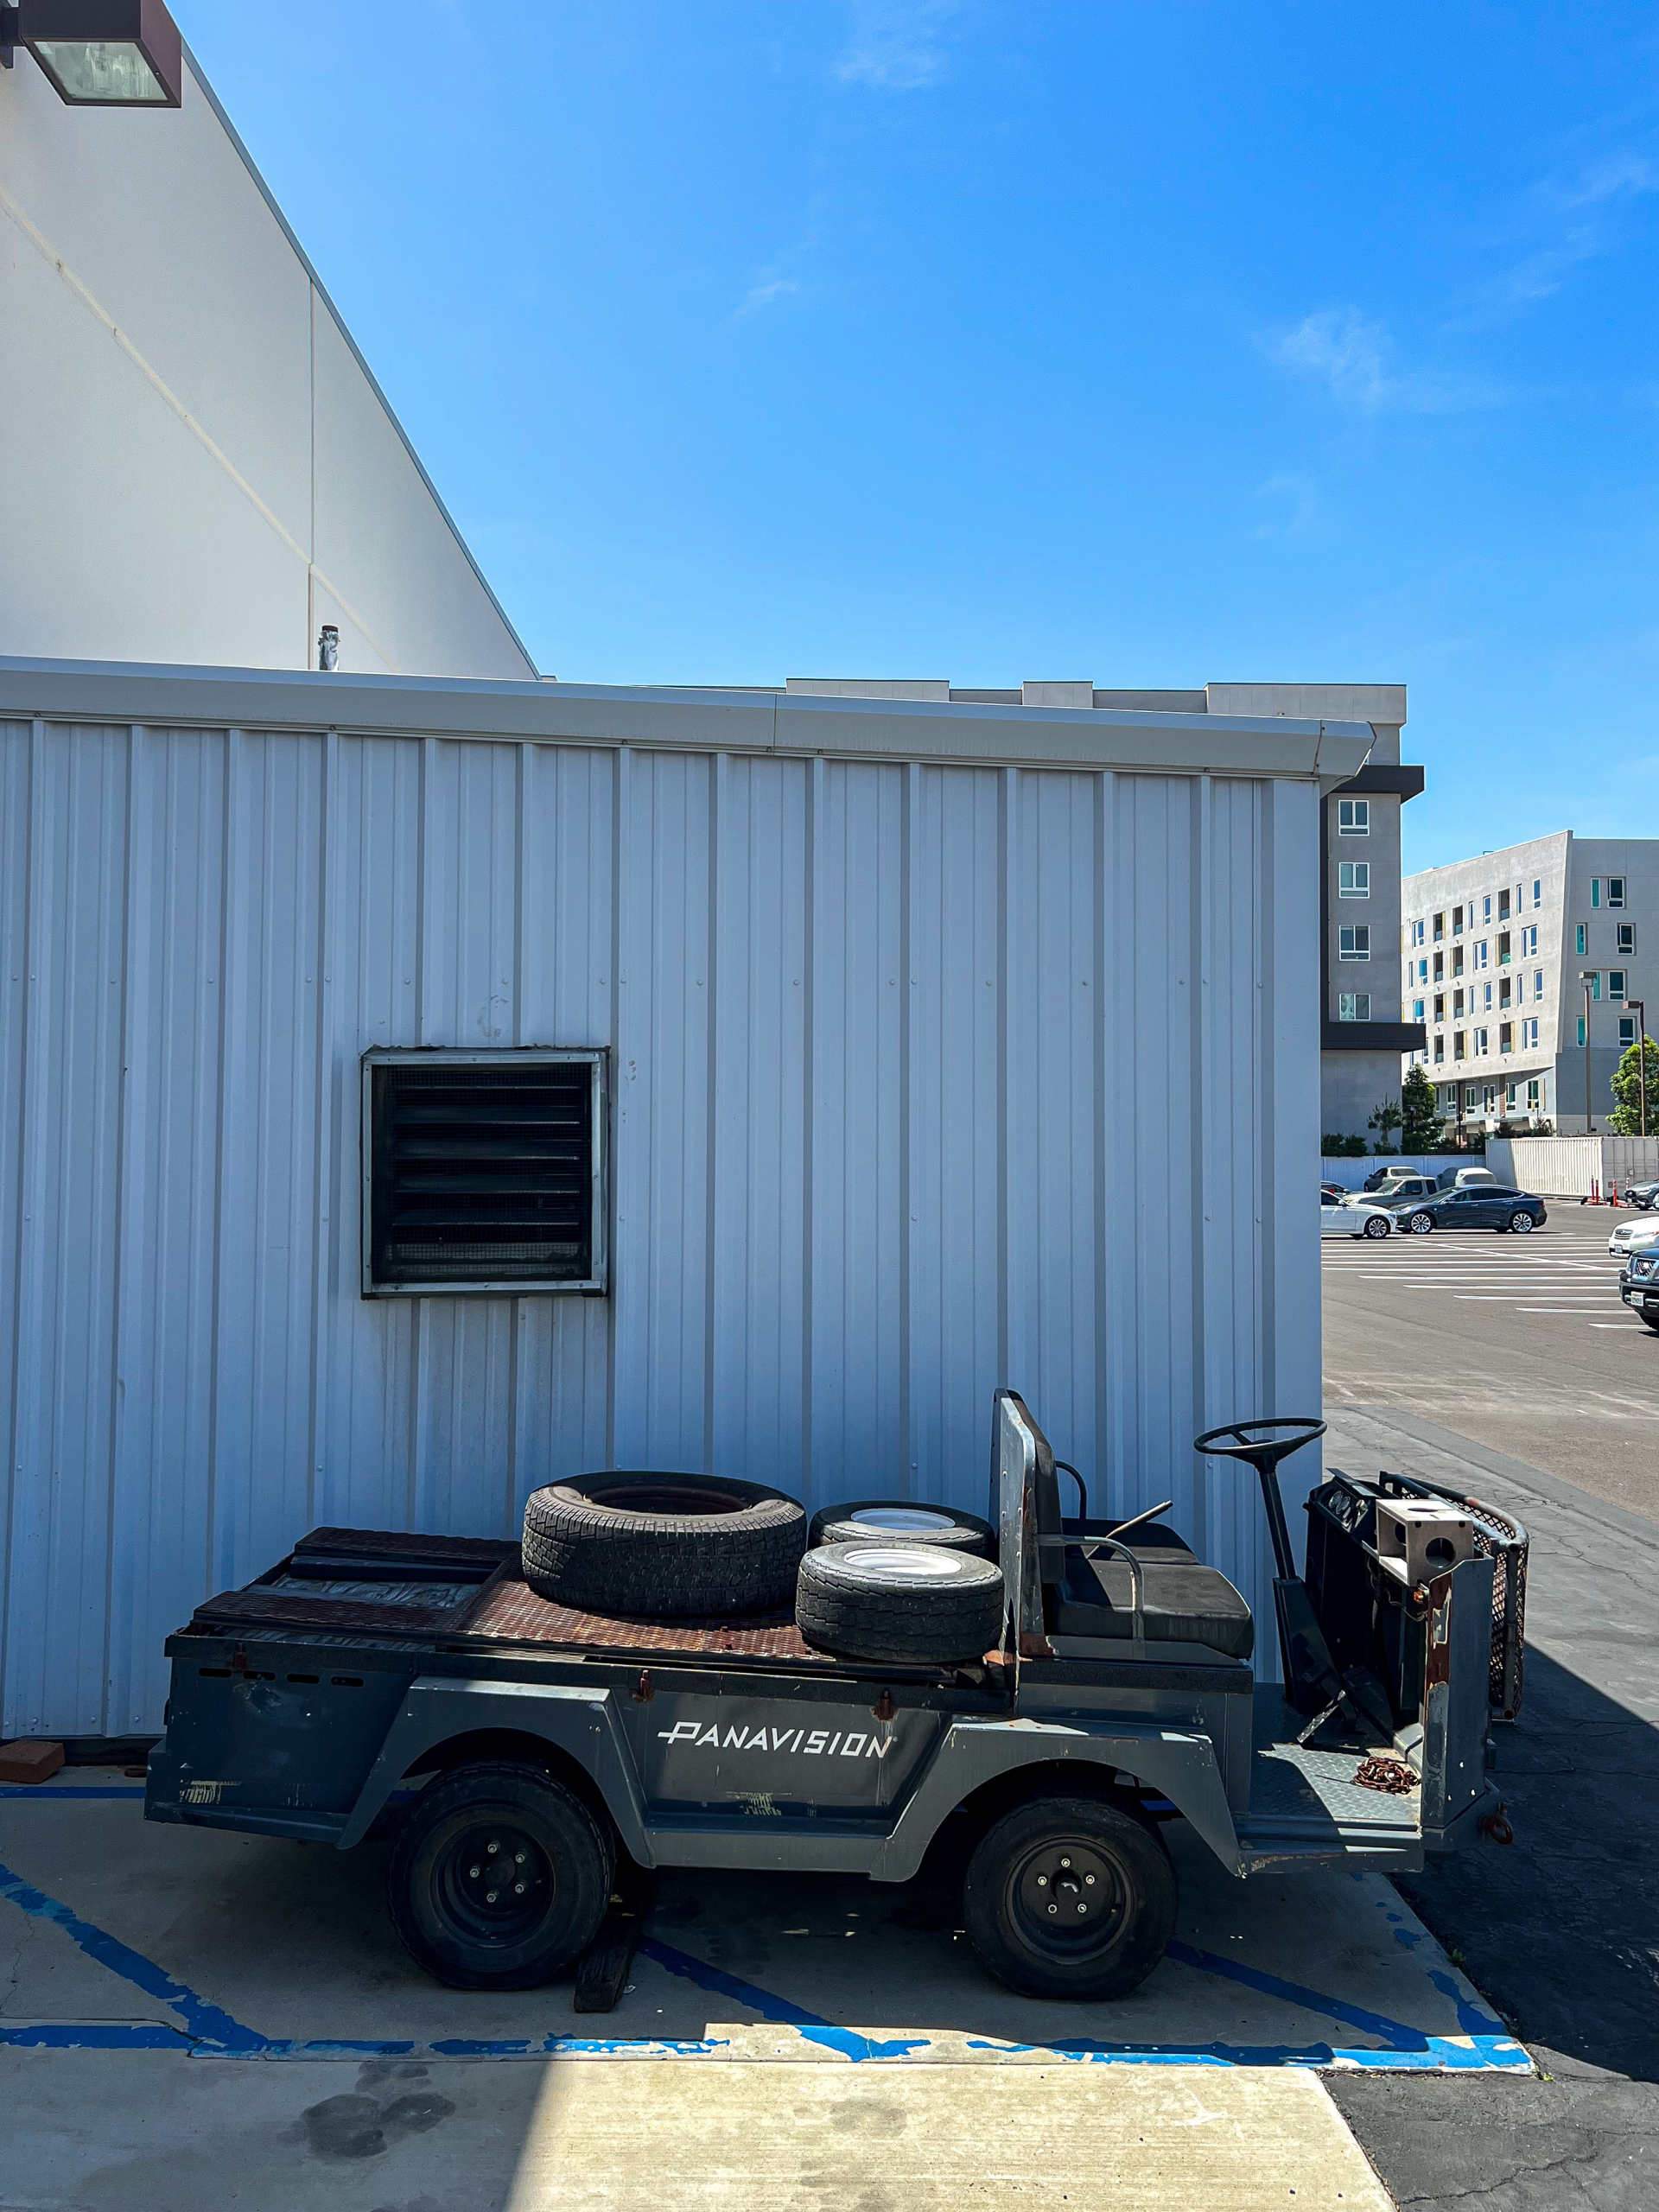 Small Utility Vehicle is parked alongside a shed in a parking lot